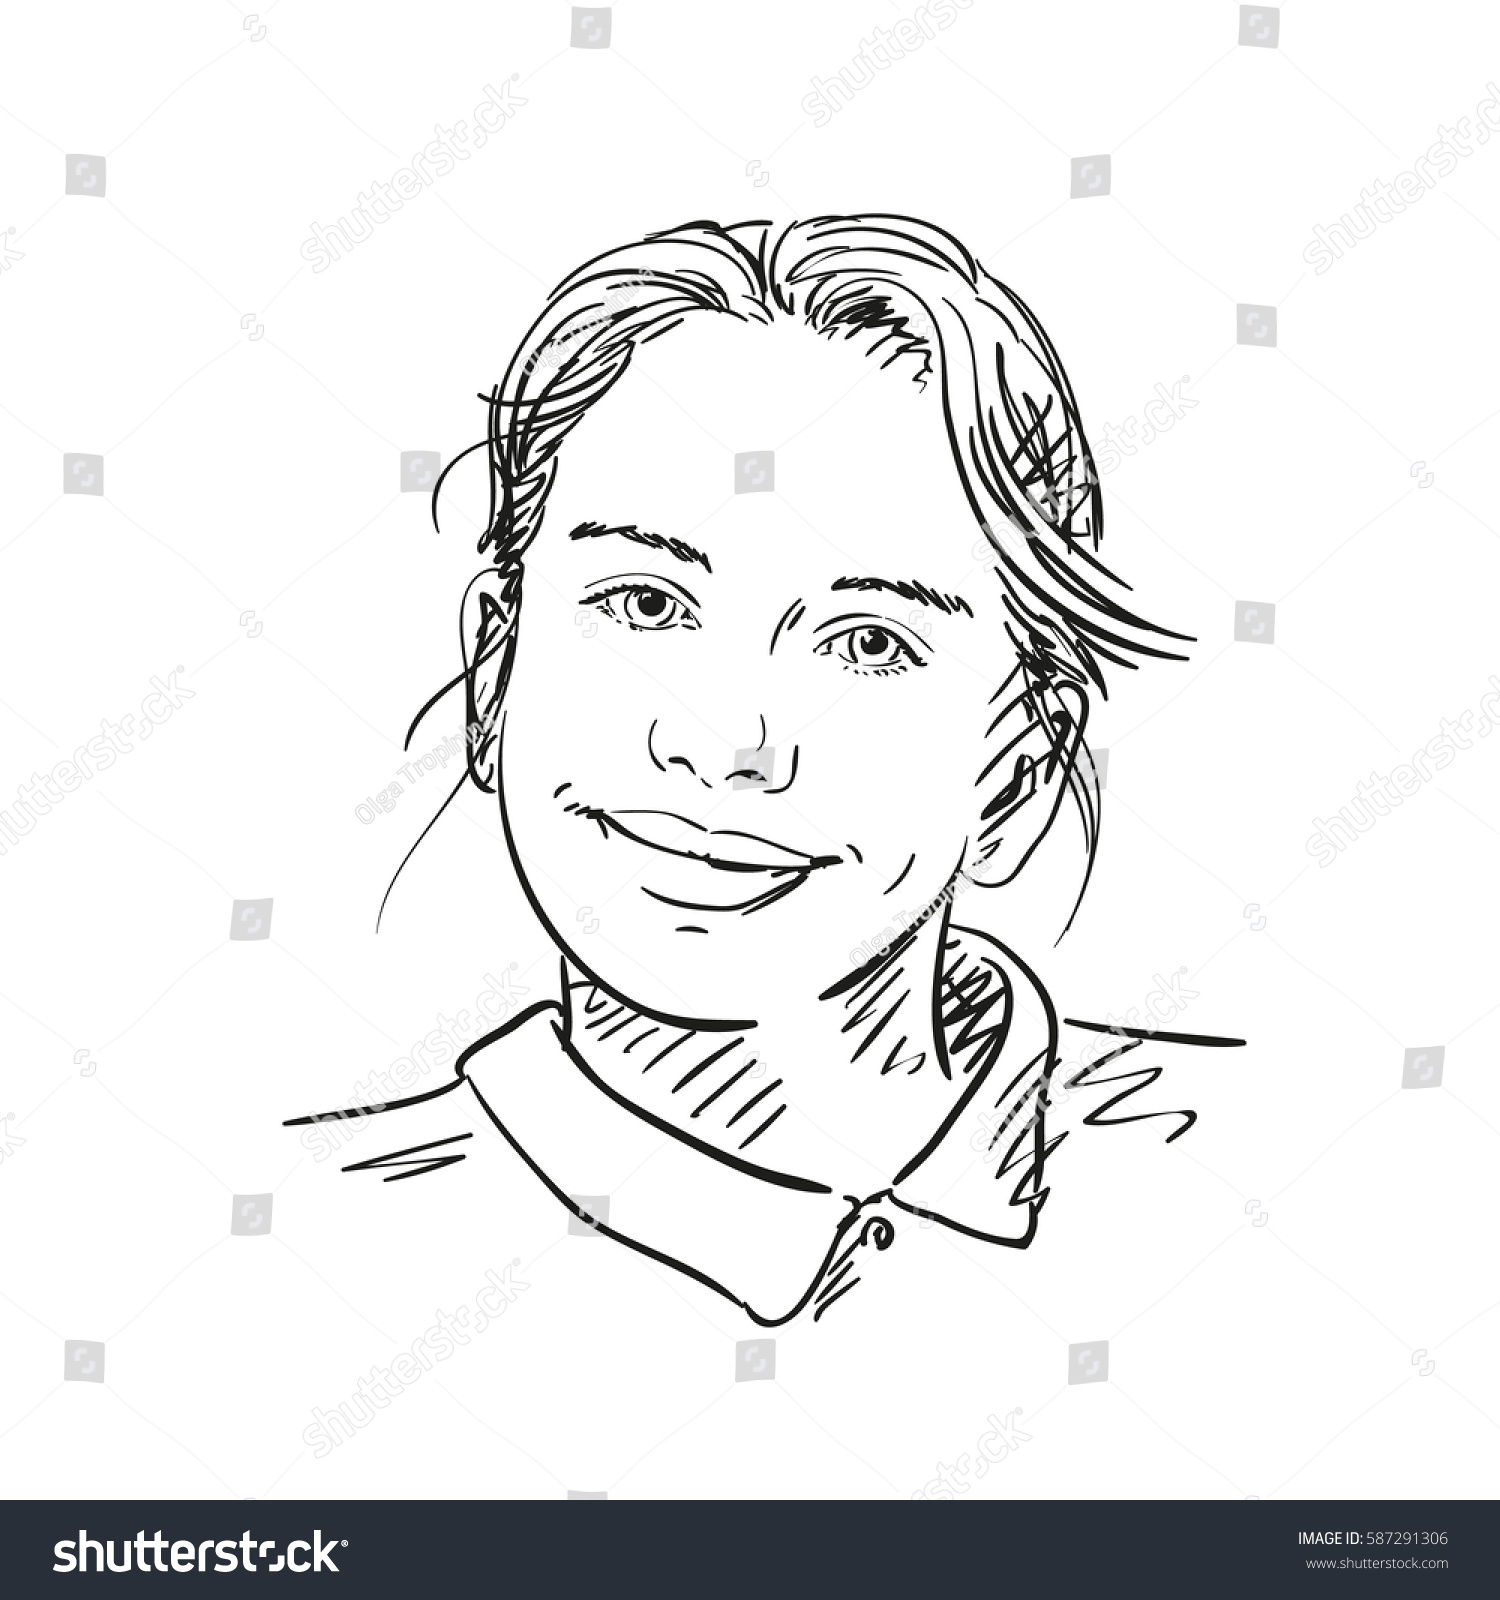 Sketch of girl's smiling face, Hand drawn vector illustration, Black lines on white #587291306